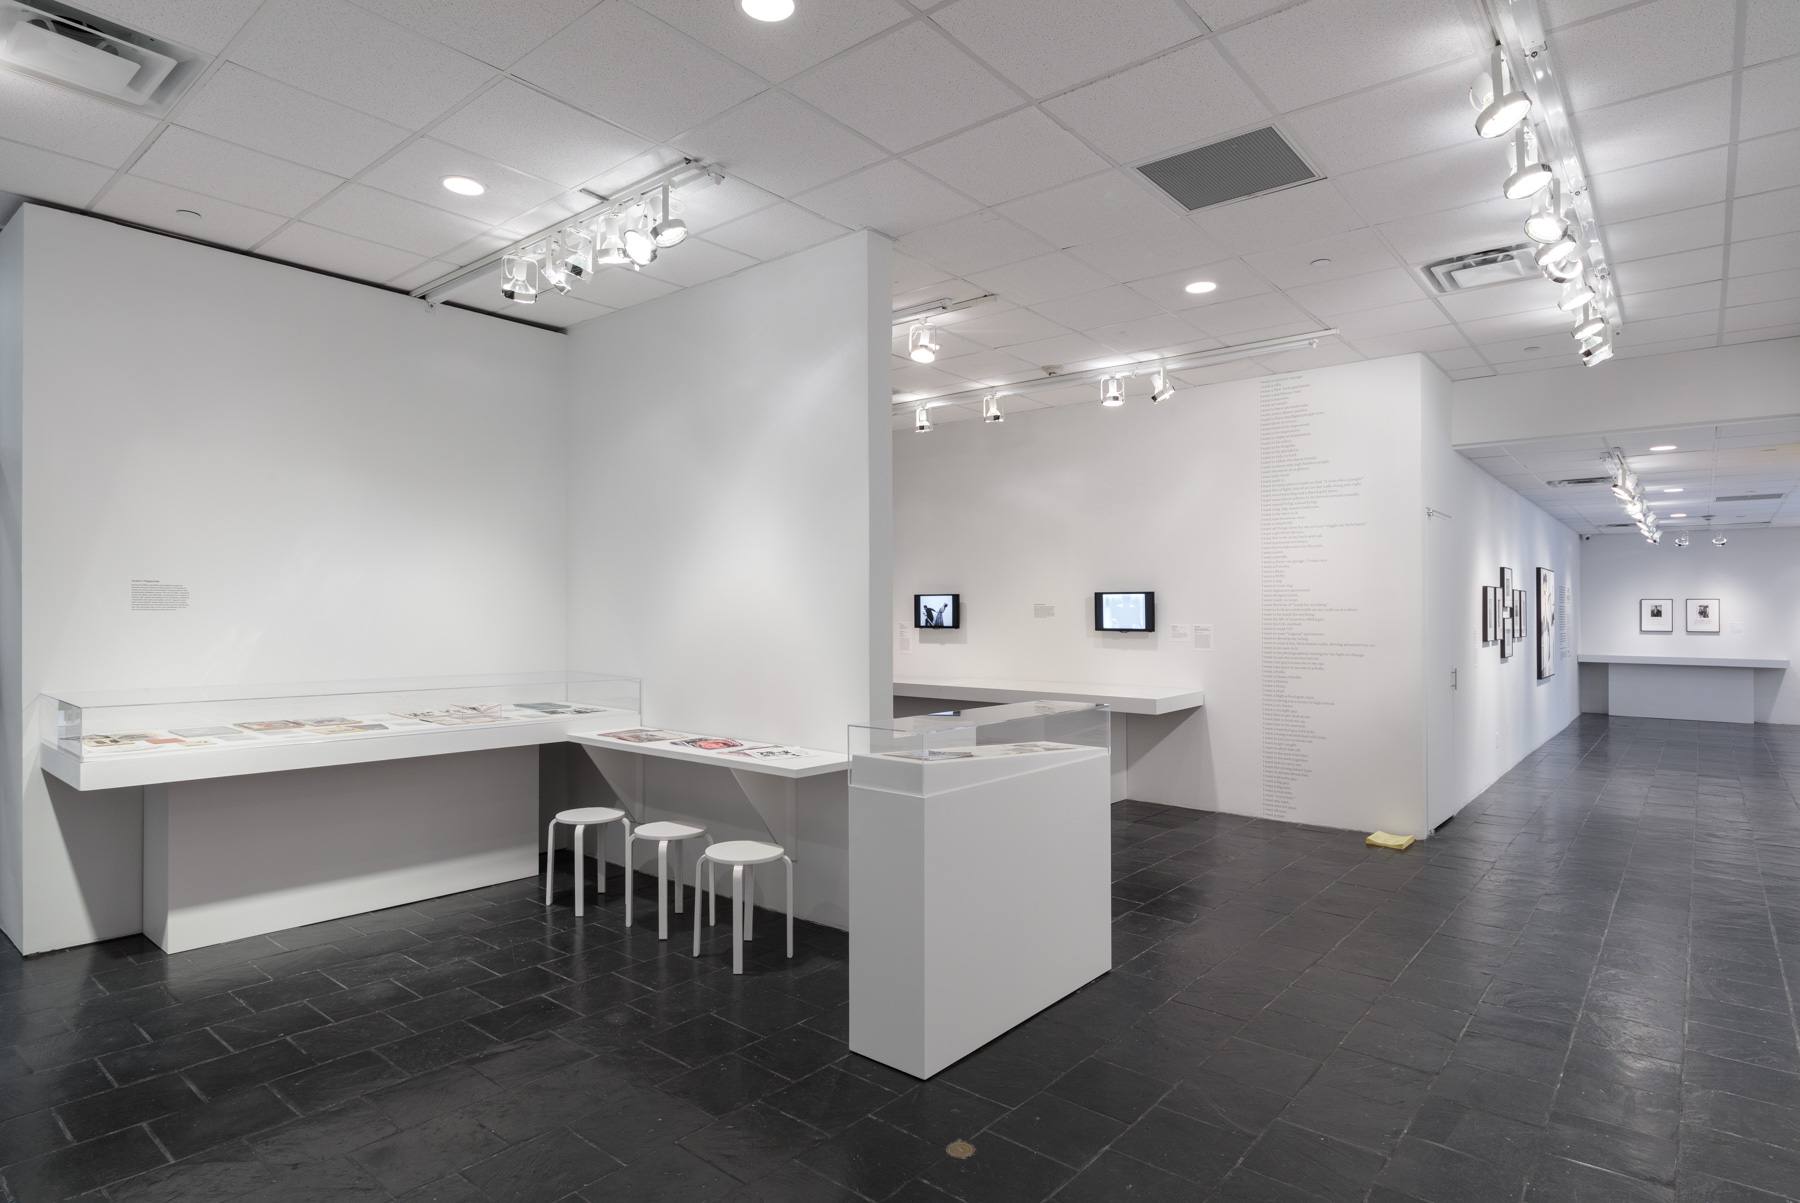  Installation view of  Axis Mundo: Queer Networks in Chicano L.A.  at the Bertha and Karl Leubsdorf Gallery. Photo by Stan Narten. Courtesy of Hunter College Art Galleries. 